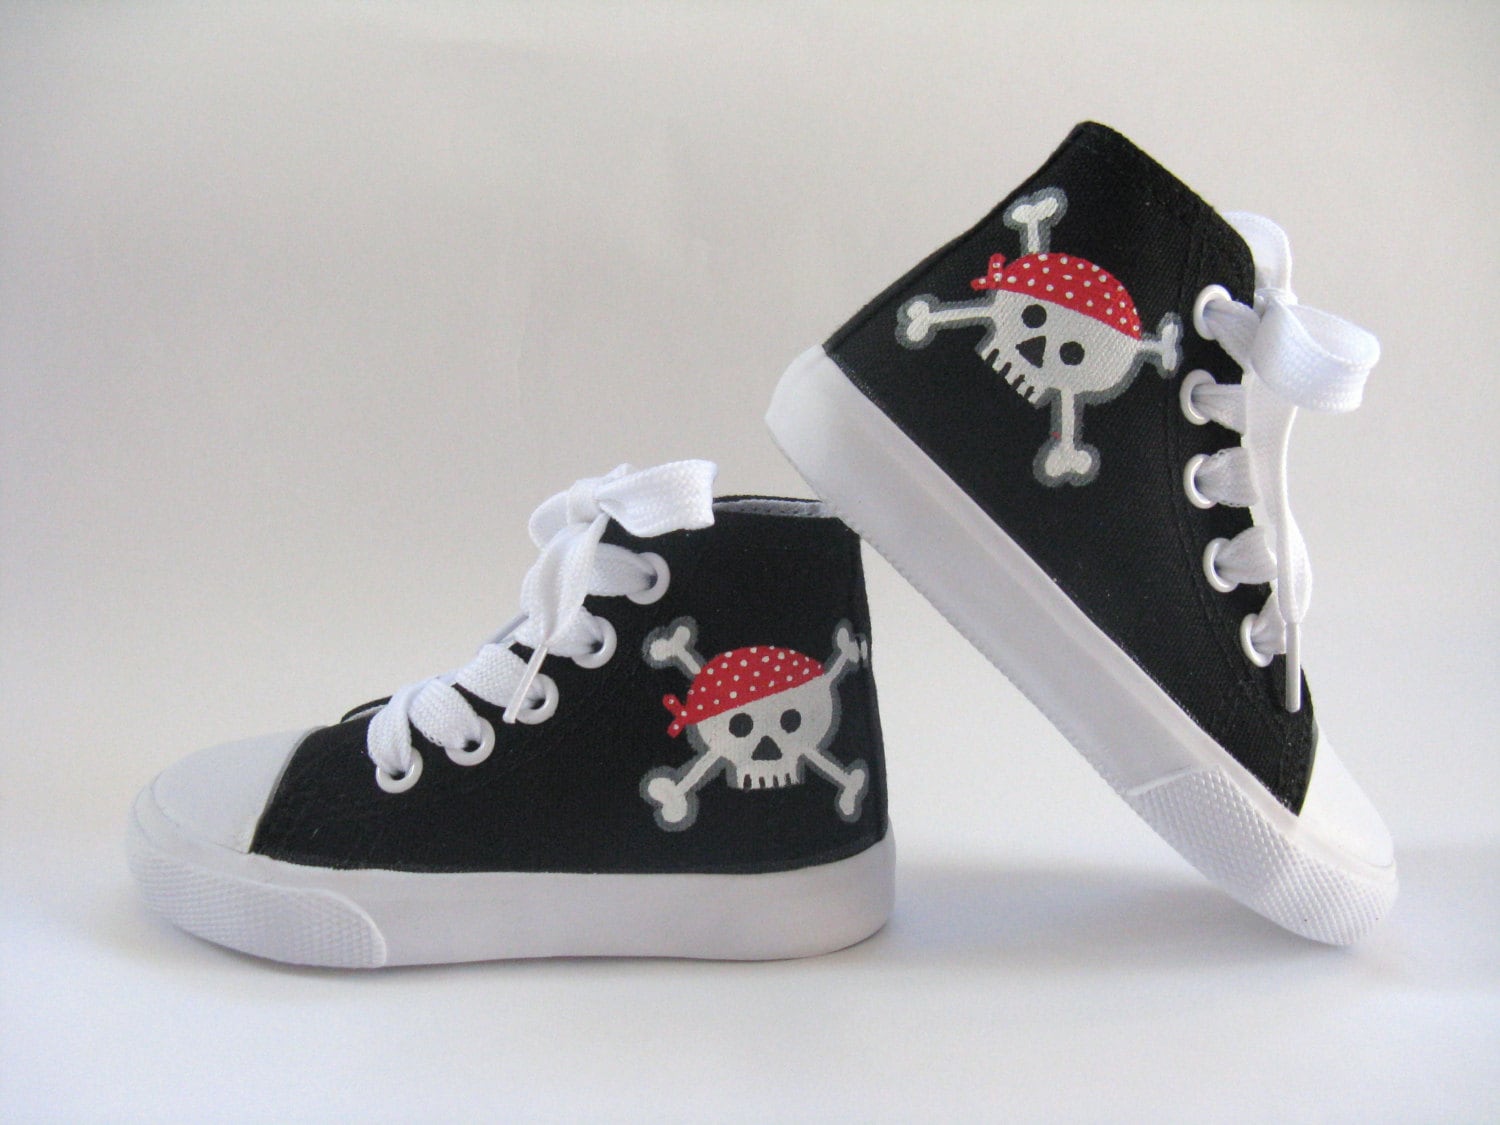 Shoe lace laces boot trainers Skull & Cross Bones red black blue white  NEW long 